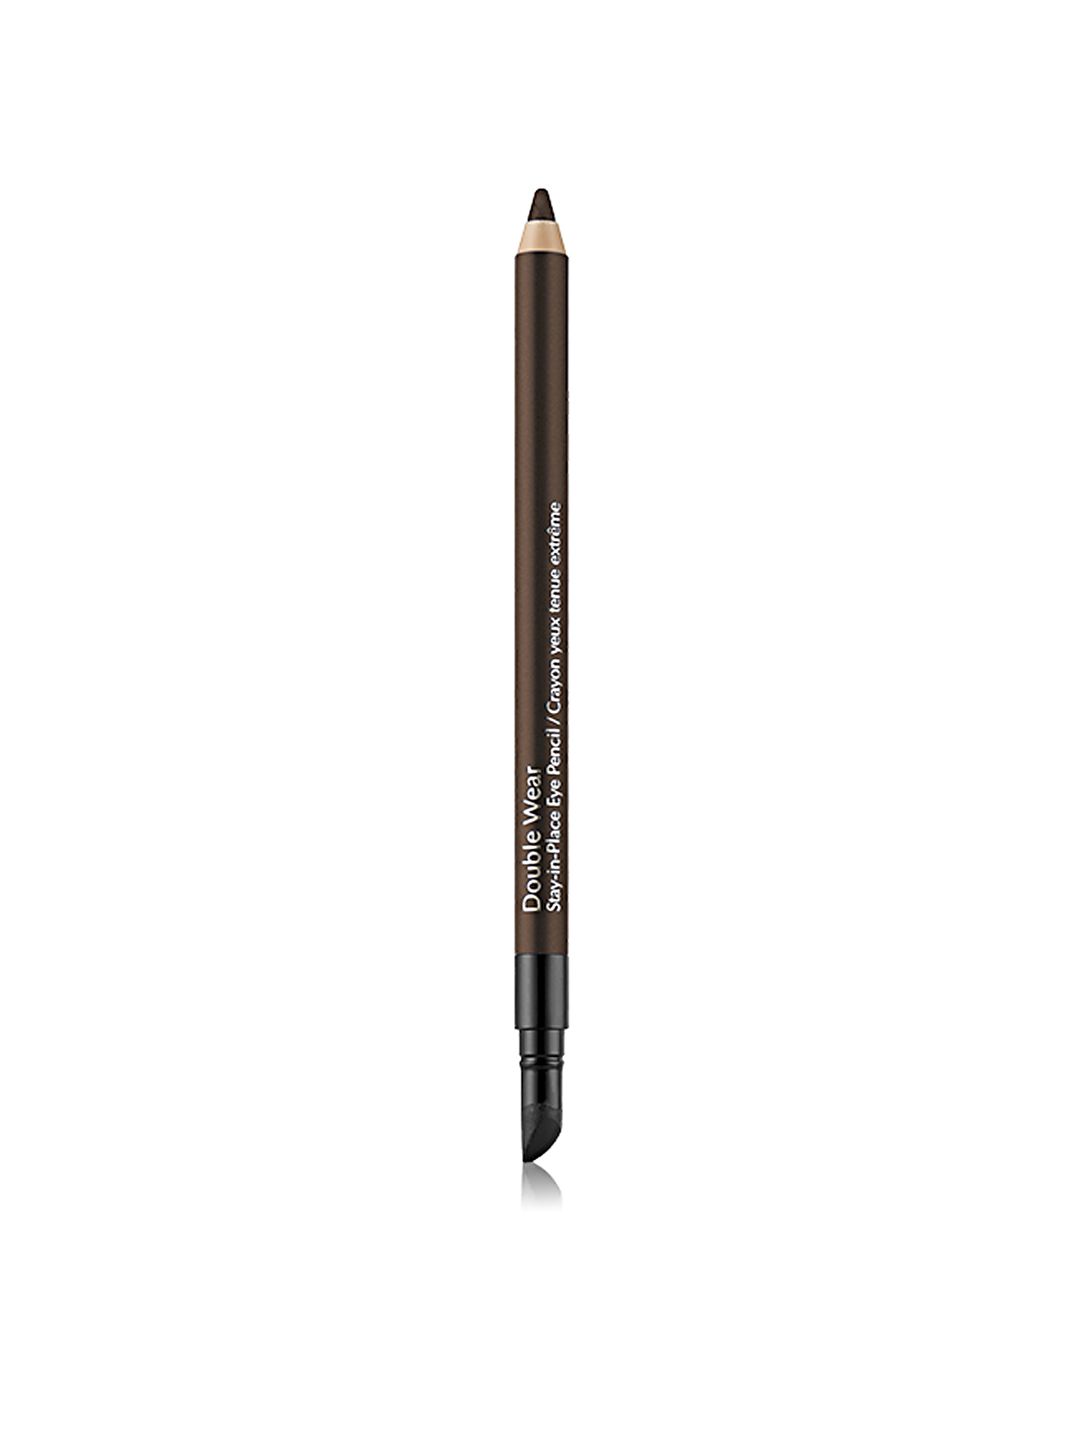 Estee Lauder Coffee Double Wear Stay-in-Place Eye Pencil Price in India